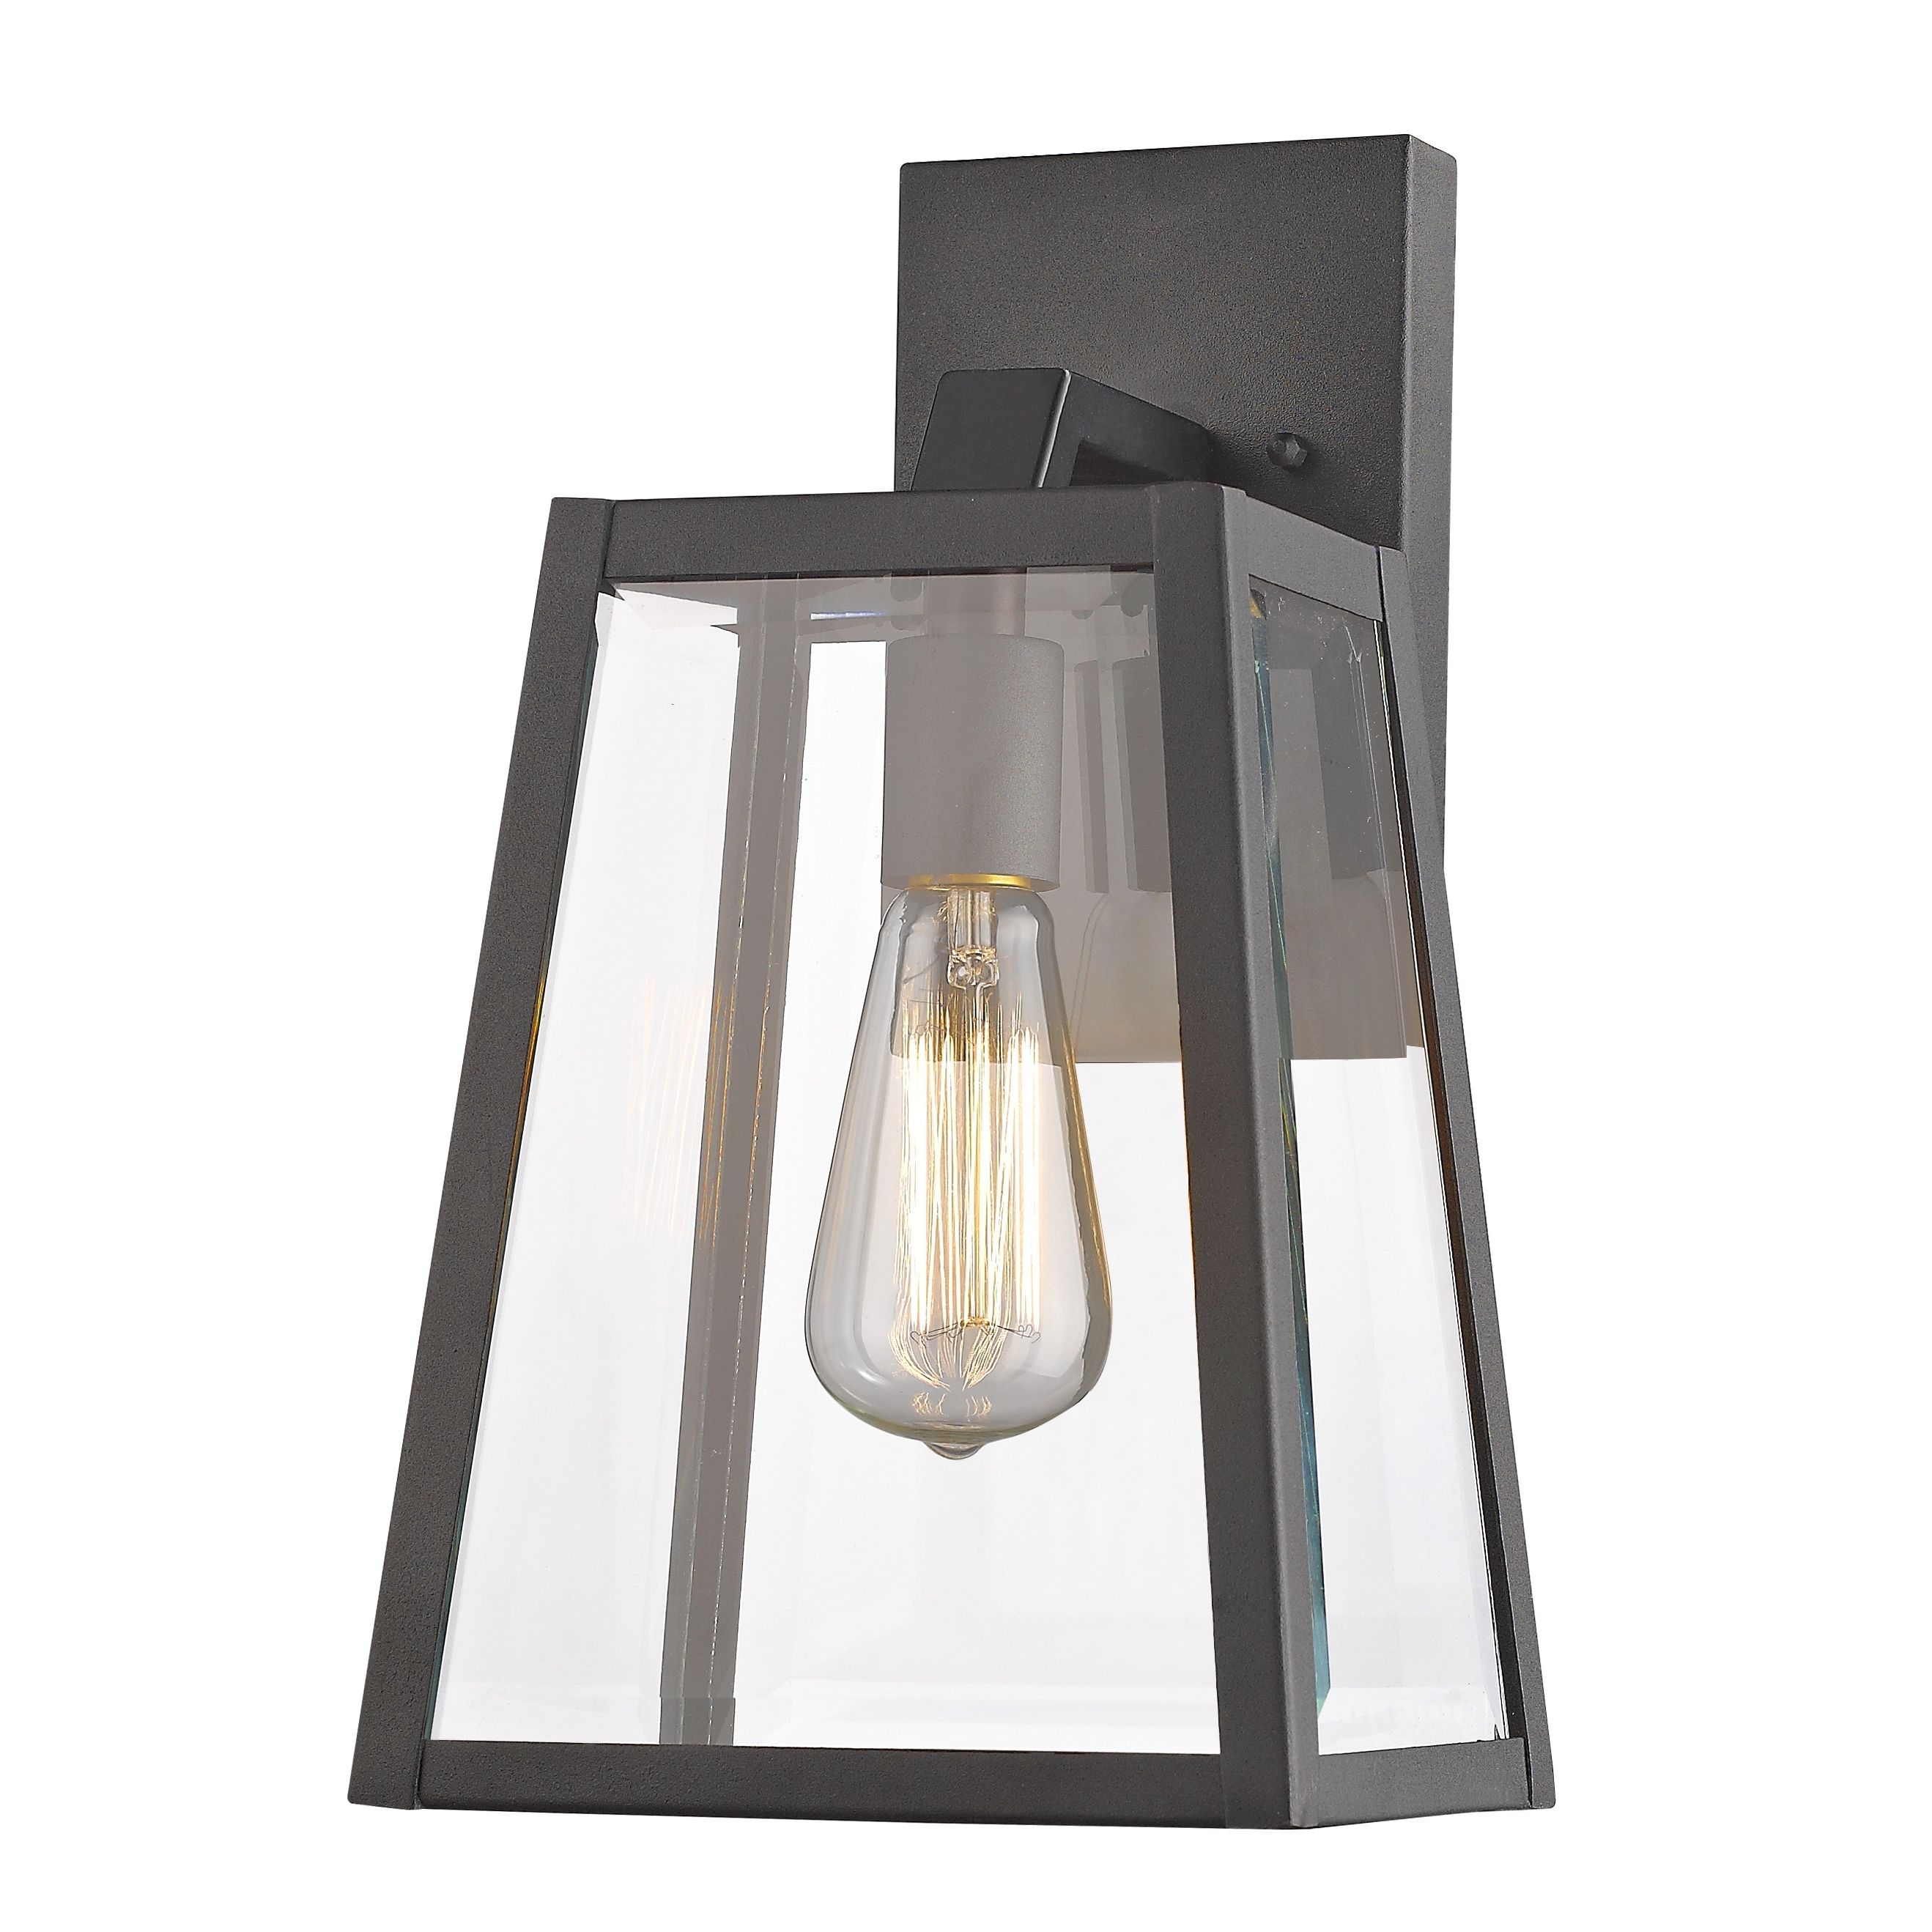 Outdoor Lighting And Light Fixtures At Wayfair With Most Current Light : Wall Mount Outdoor Lighting Monte Grande Slate Lantern Savoy (View 8 of 20)